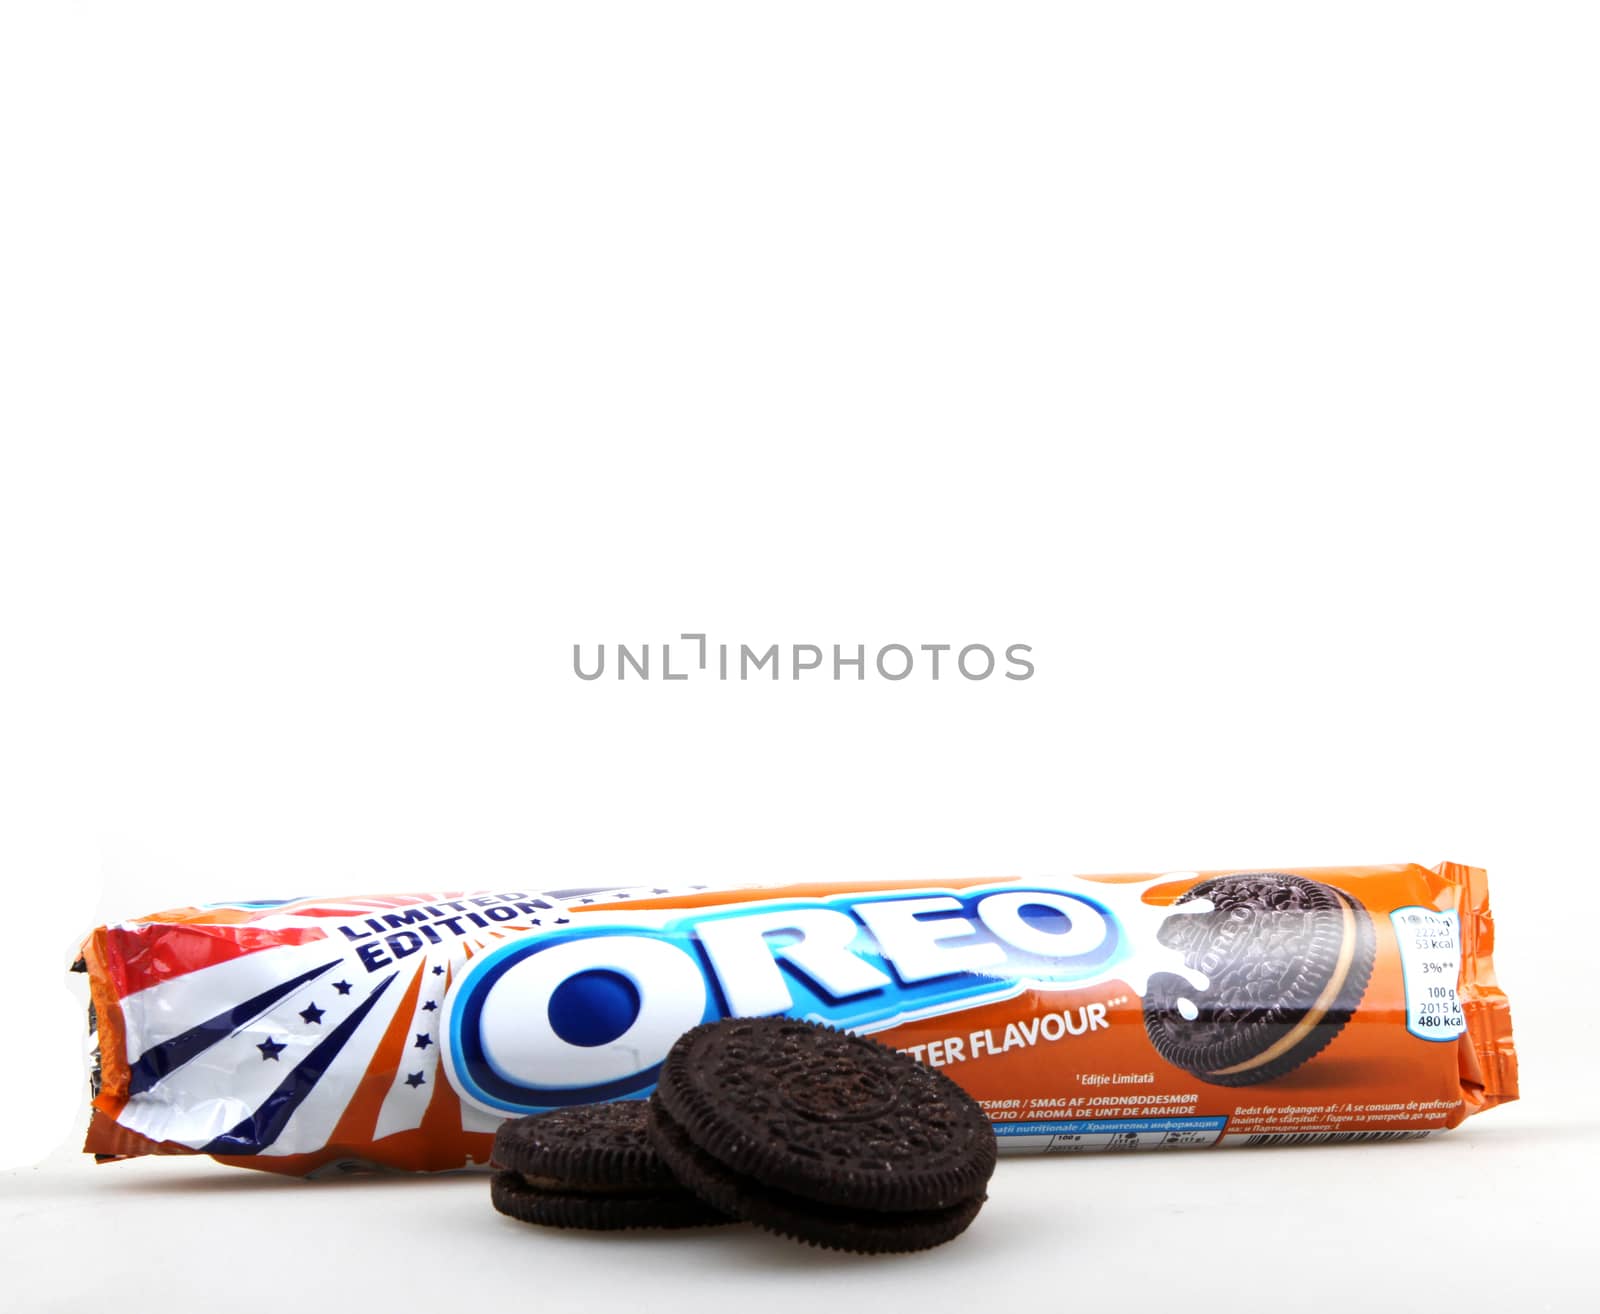 AYTOS, BULGARIA - MARCH 12, 2016: Oreo isolated on white background. Oreo is a sandwich cookie consisting of two chocolate disks with a sweet cream filling in between.